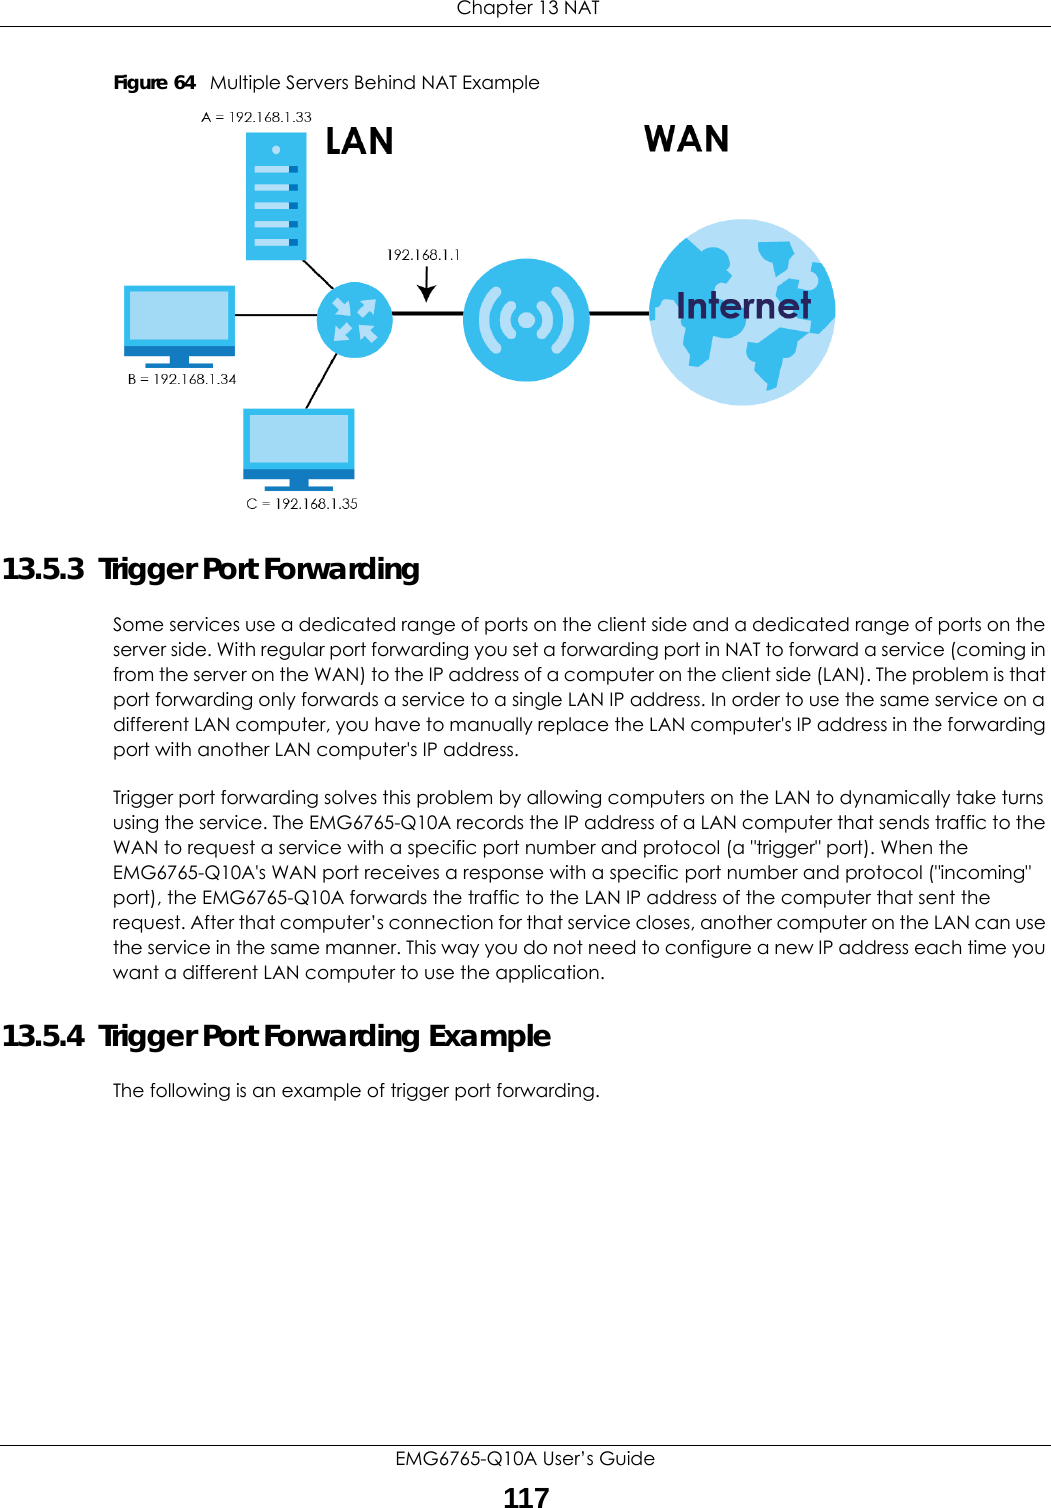  Chapter 13 NATEMG6765-Q10A User’s Guide117Figure 64   Multiple Servers Behind NAT Example13.5.3  Trigger Port Forwarding Some services use a dedicated range of ports on the client side and a dedicated range of ports on the server side. With regular port forwarding you set a forwarding port in NAT to forward a service (coming in from the server on the WAN) to the IP address of a computer on the client side (LAN). The problem is that port forwarding only forwards a service to a single LAN IP address. In order to use the same service on a different LAN computer, you have to manually replace the LAN computer&apos;s IP address in the forwarding port with another LAN computer&apos;s IP address. Trigger port forwarding solves this problem by allowing computers on the LAN to dynamically take turns using the service. The EMG6765-Q10A records the IP address of a LAN computer that sends traffic to the WAN to request a service with a specific port number and protocol (a &quot;trigger&quot; port). When the EMG6765-Q10A&apos;s WAN port receives a response with a specific port number and protocol (&quot;incoming&quot; port), the EMG6765-Q10A forwards the traffic to the LAN IP address of the computer that sent the request. After that computer’s connection for that service closes, another computer on the LAN can use the service in the same manner. This way you do not need to configure a new IP address each time you want a different LAN computer to use the application.13.5.4  Trigger Port Forwarding Example The following is an example of trigger port forwarding.